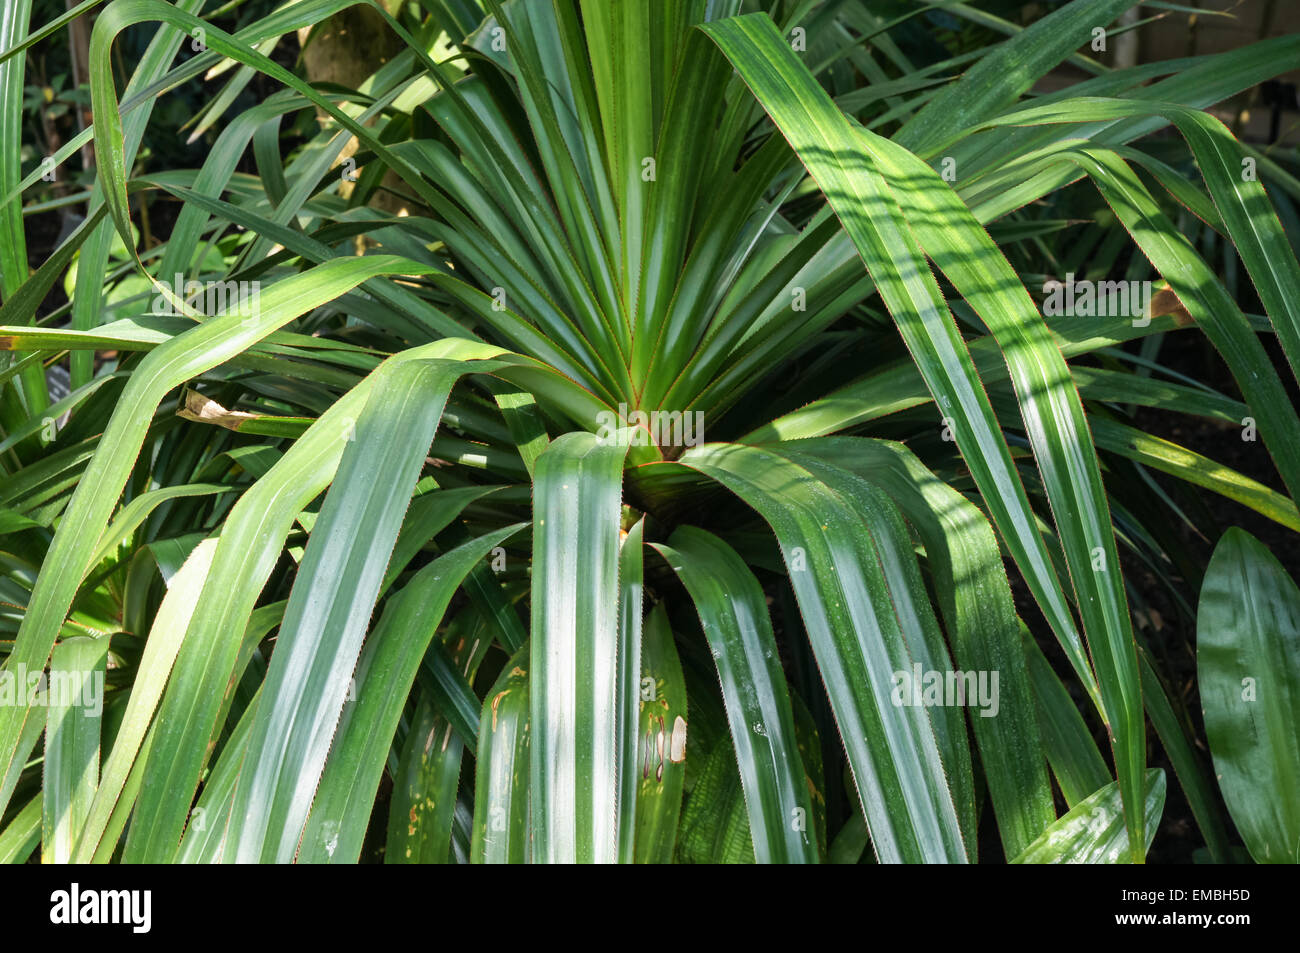 green long leaves of tropical plant Stock Photo